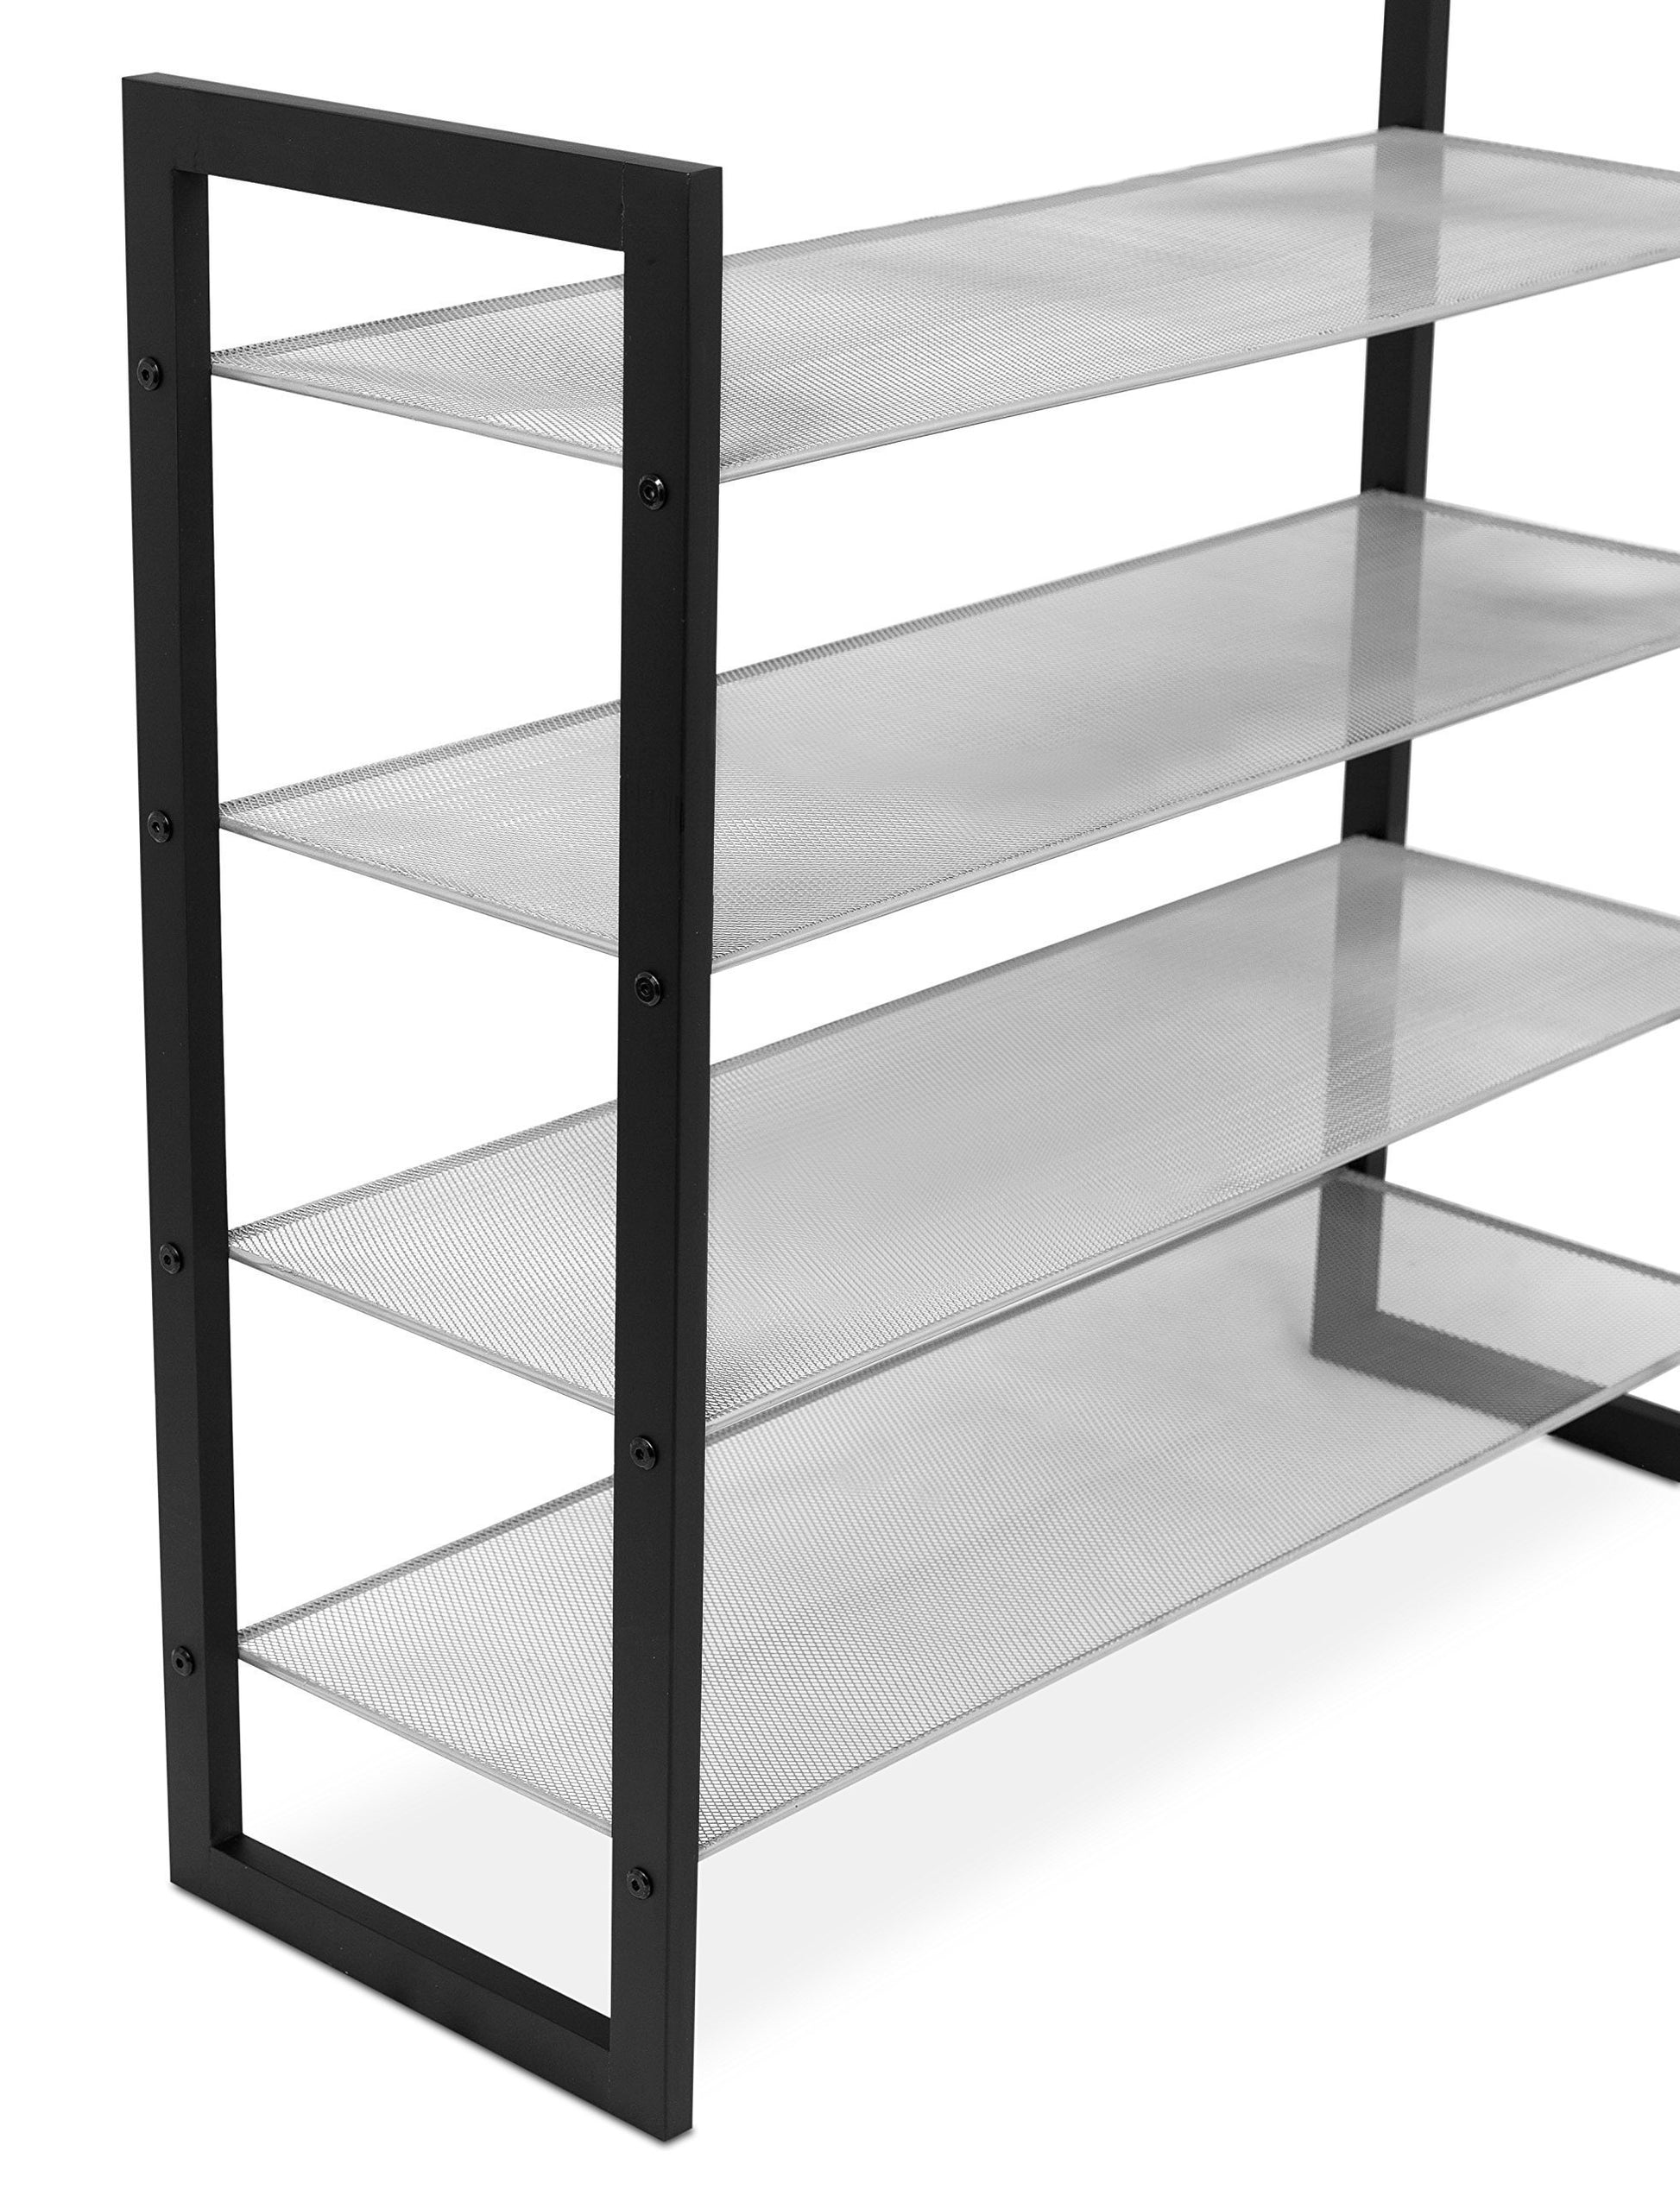 Shop internets best mesh shoe rack 4 tier free standing metal wood shoe organizer closet and entryway fits 16 pairs of shoes black silver